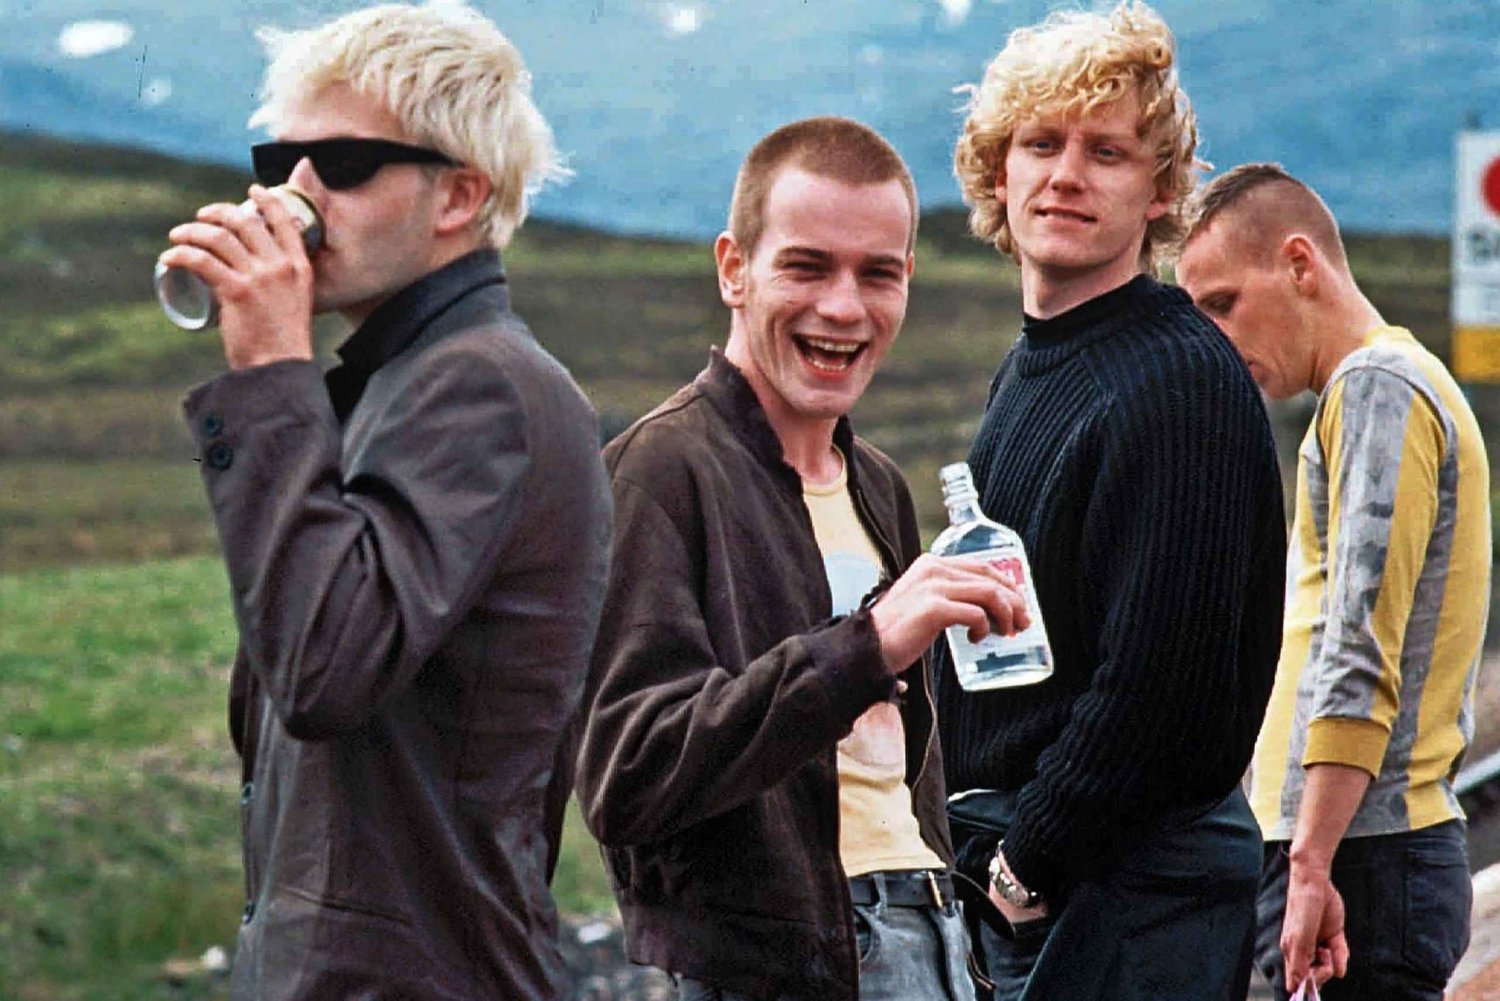 Leith, The Shore & Trainspotting